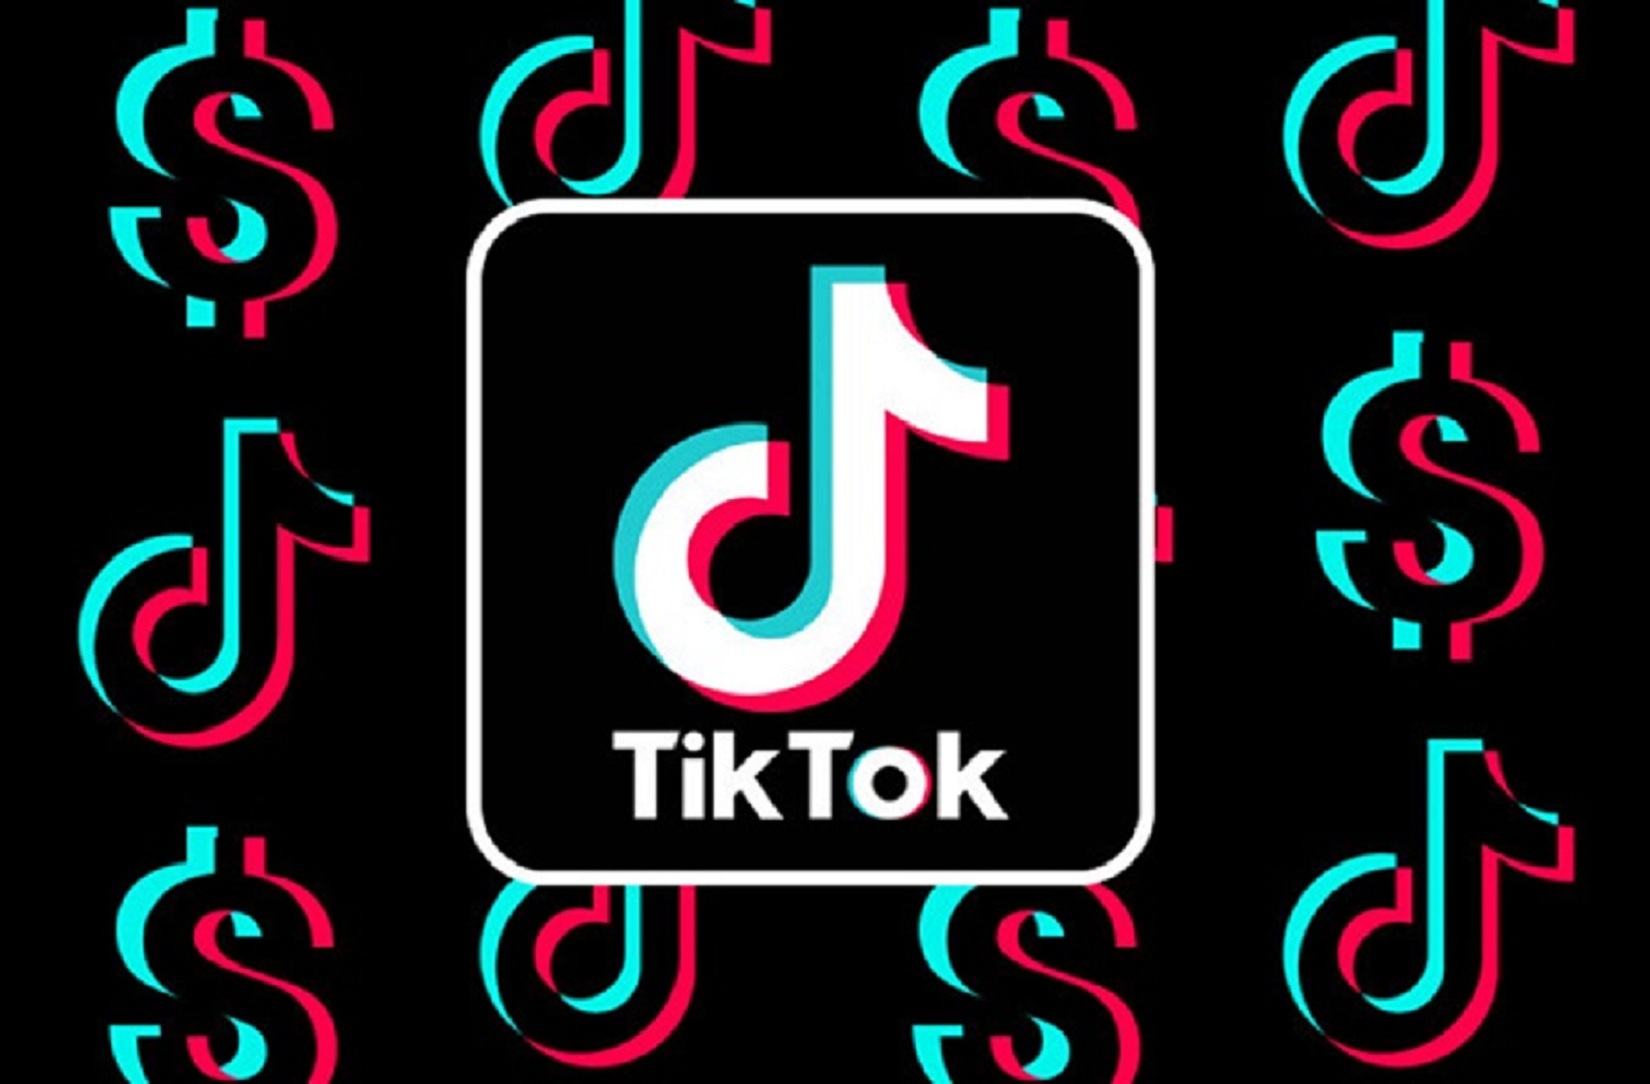 Microsoft to buy TikTok after Trump announced he’ll ban the company from operating in US